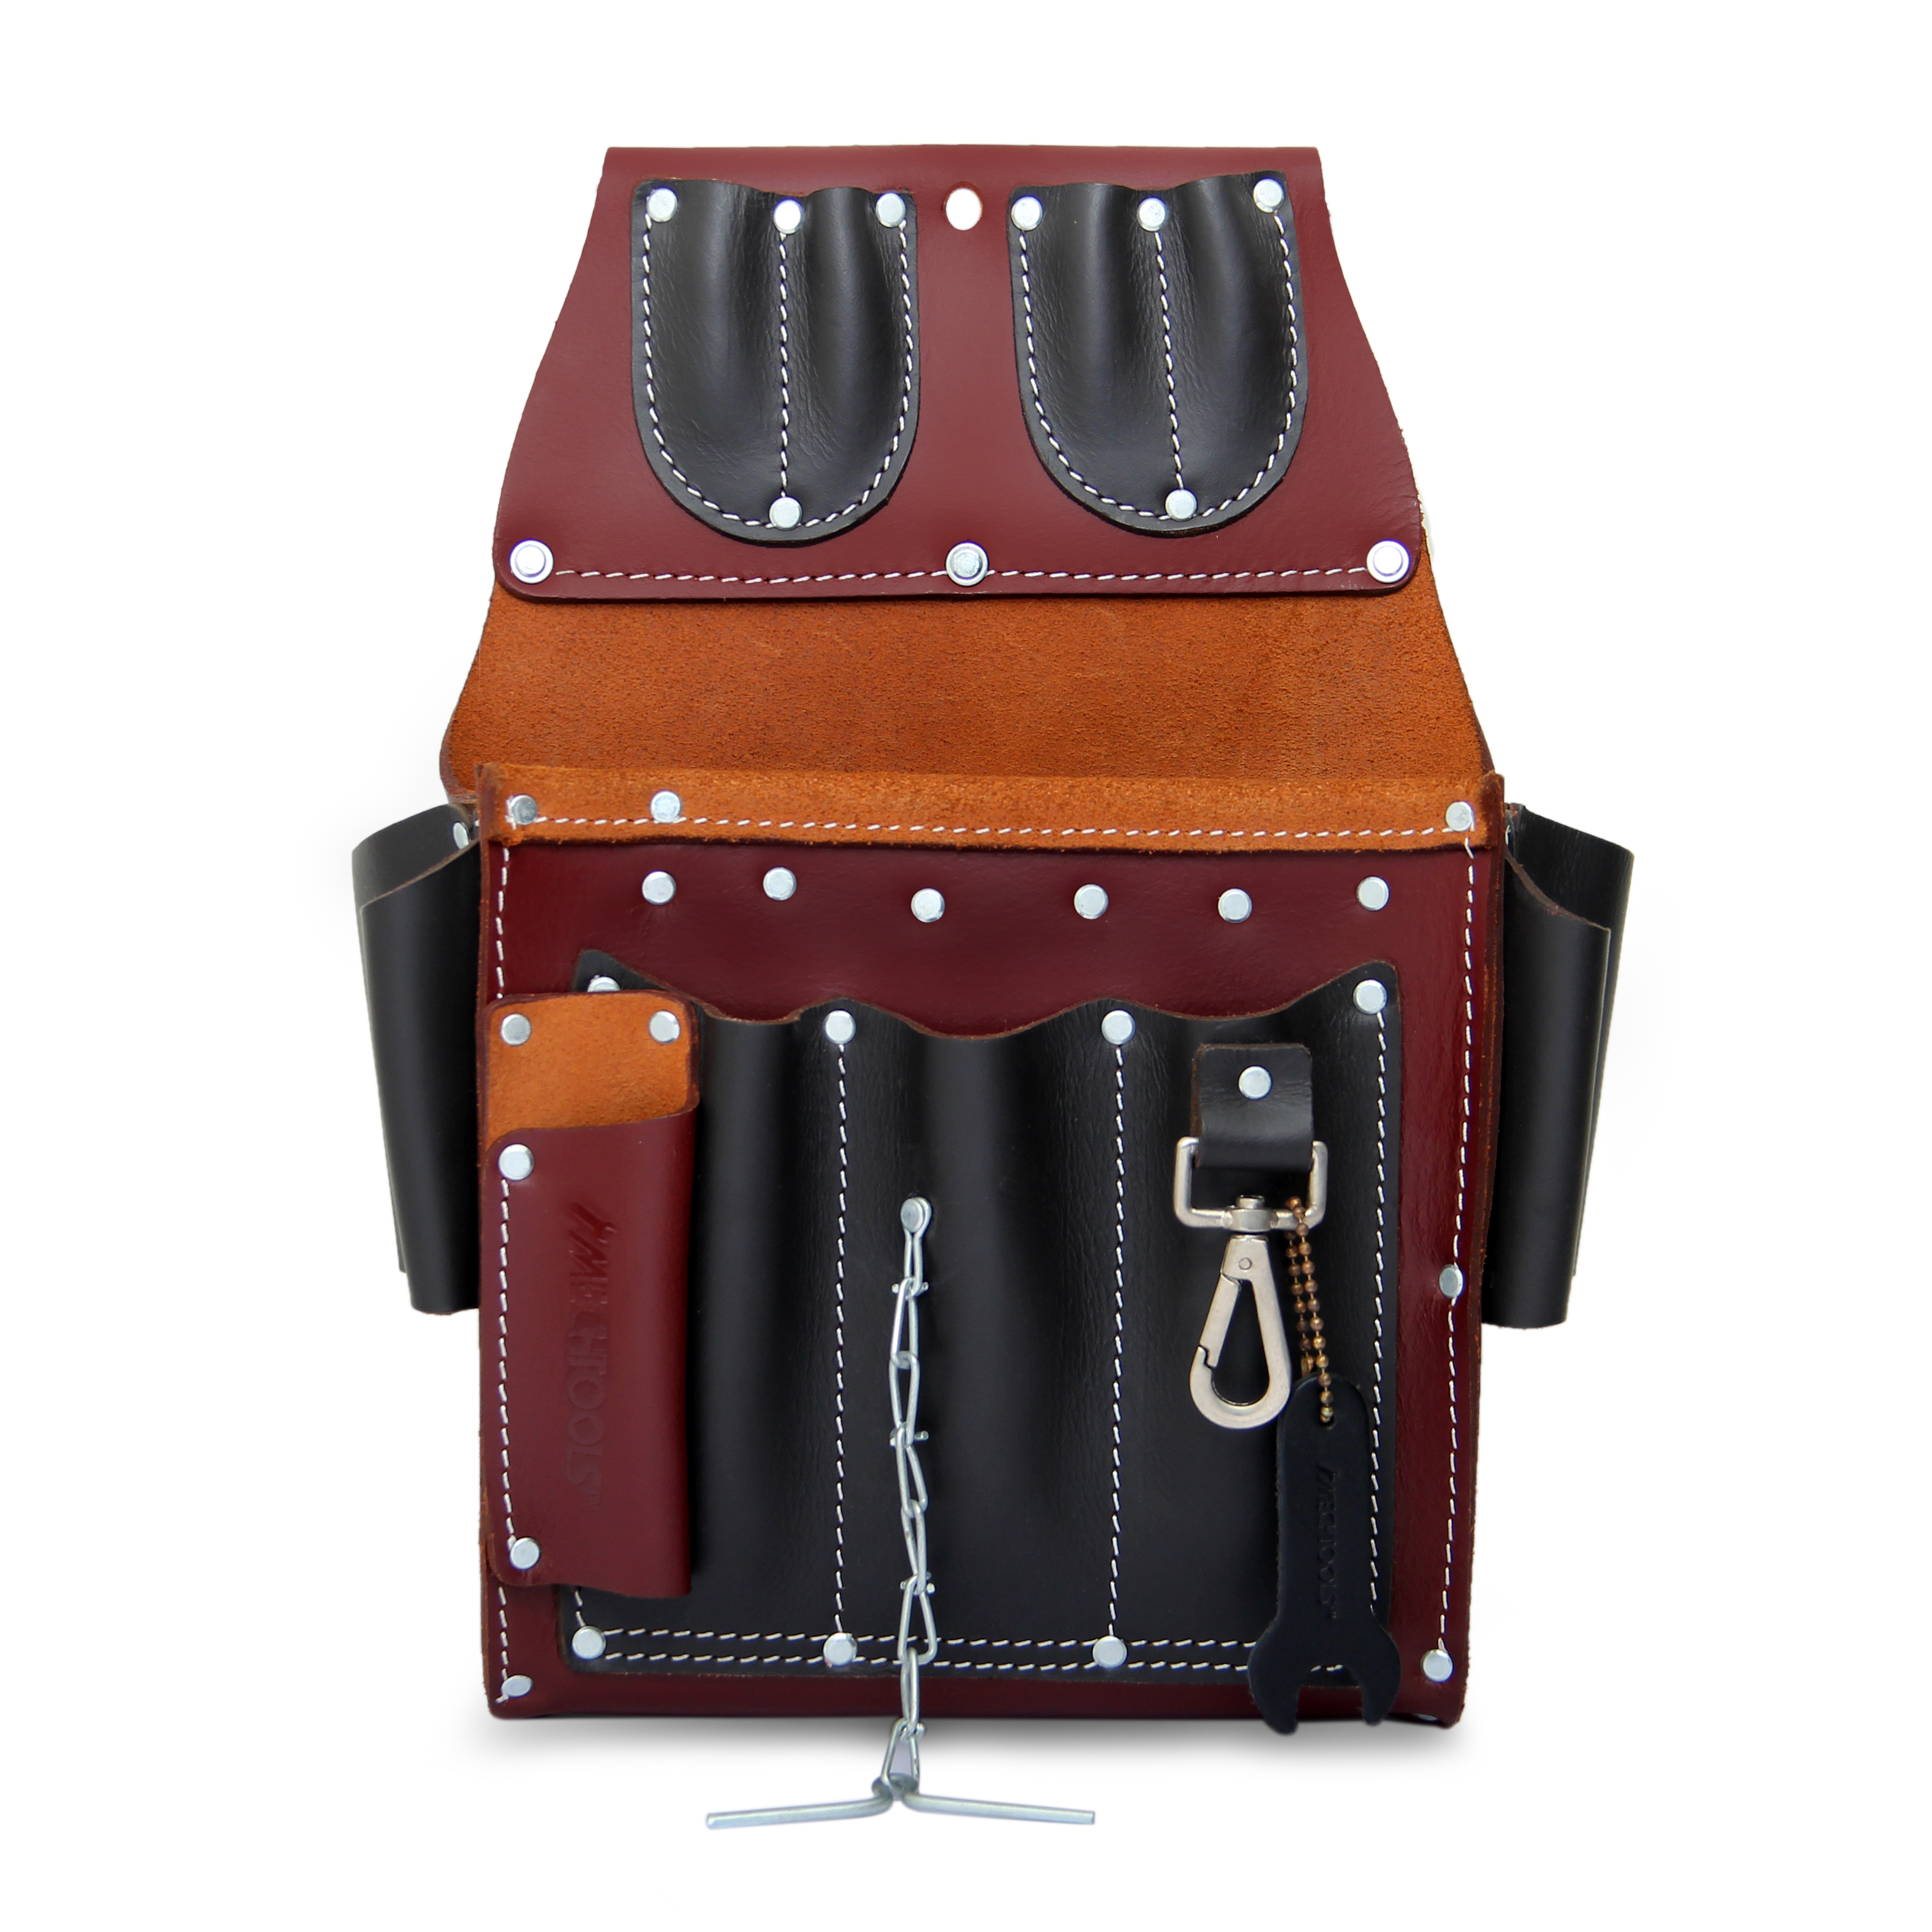 LEATHER PRO
ELECTRICIANS TOOL BAG